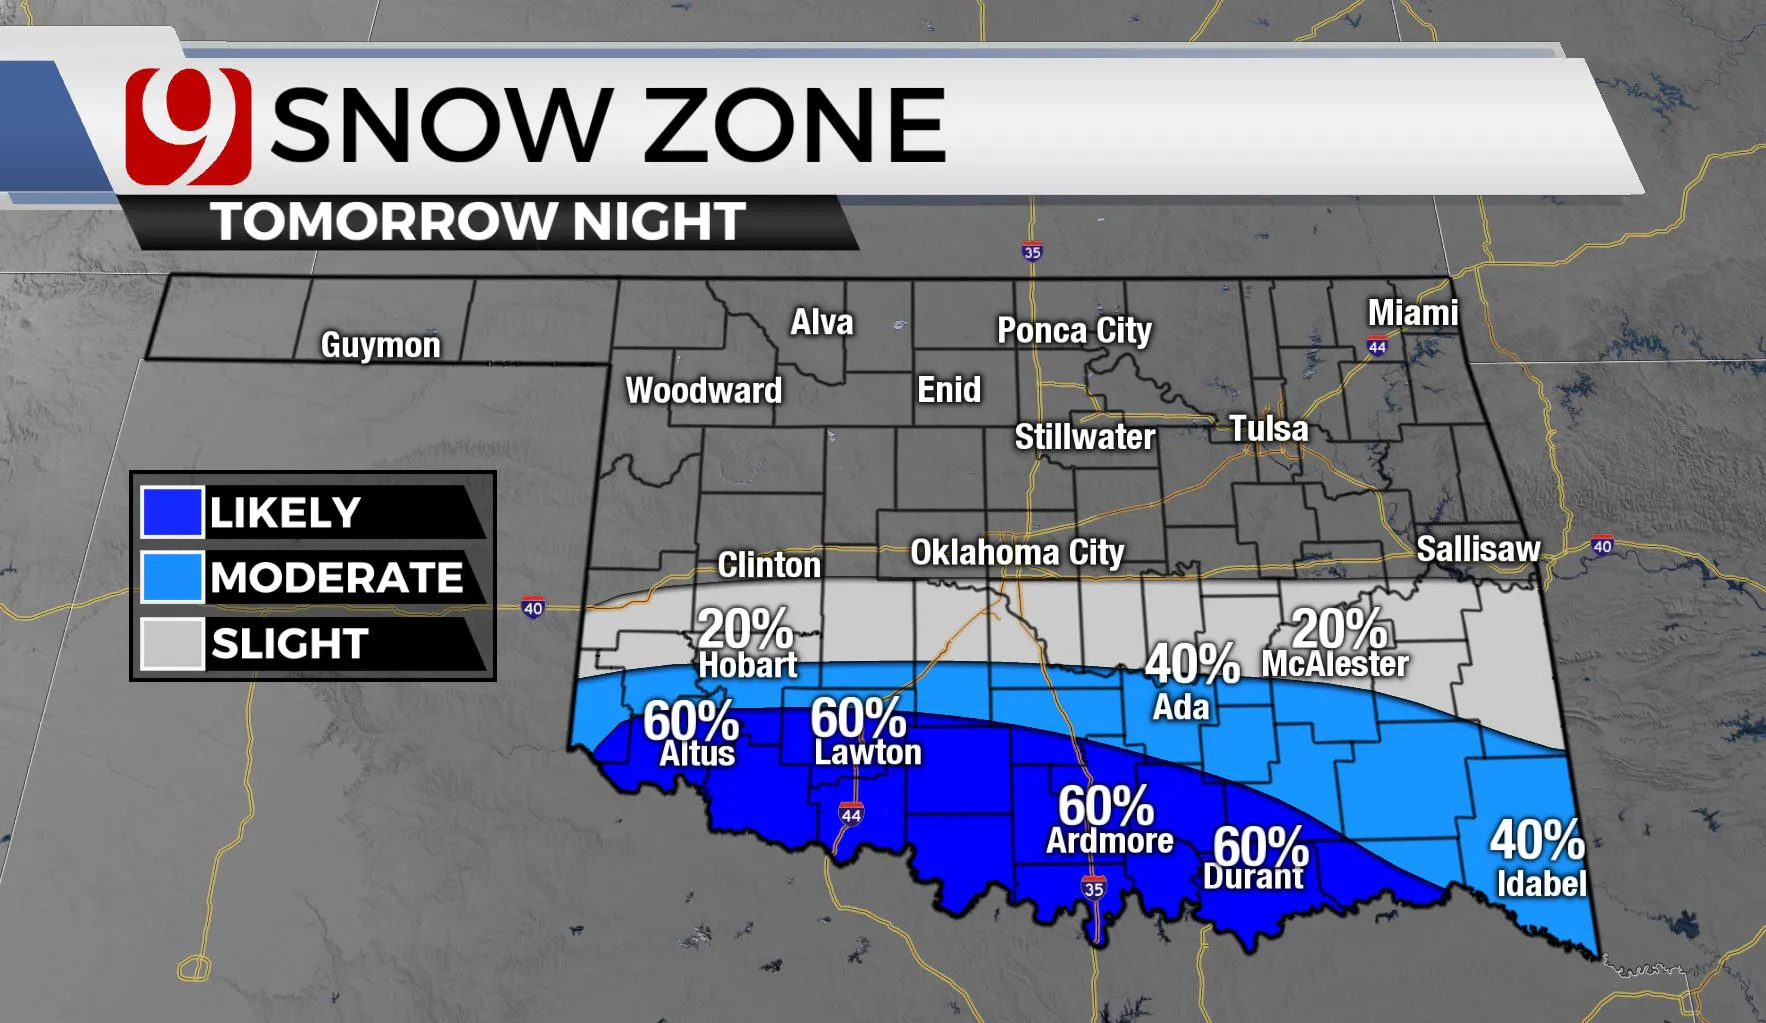 Snow zone for Friday night.